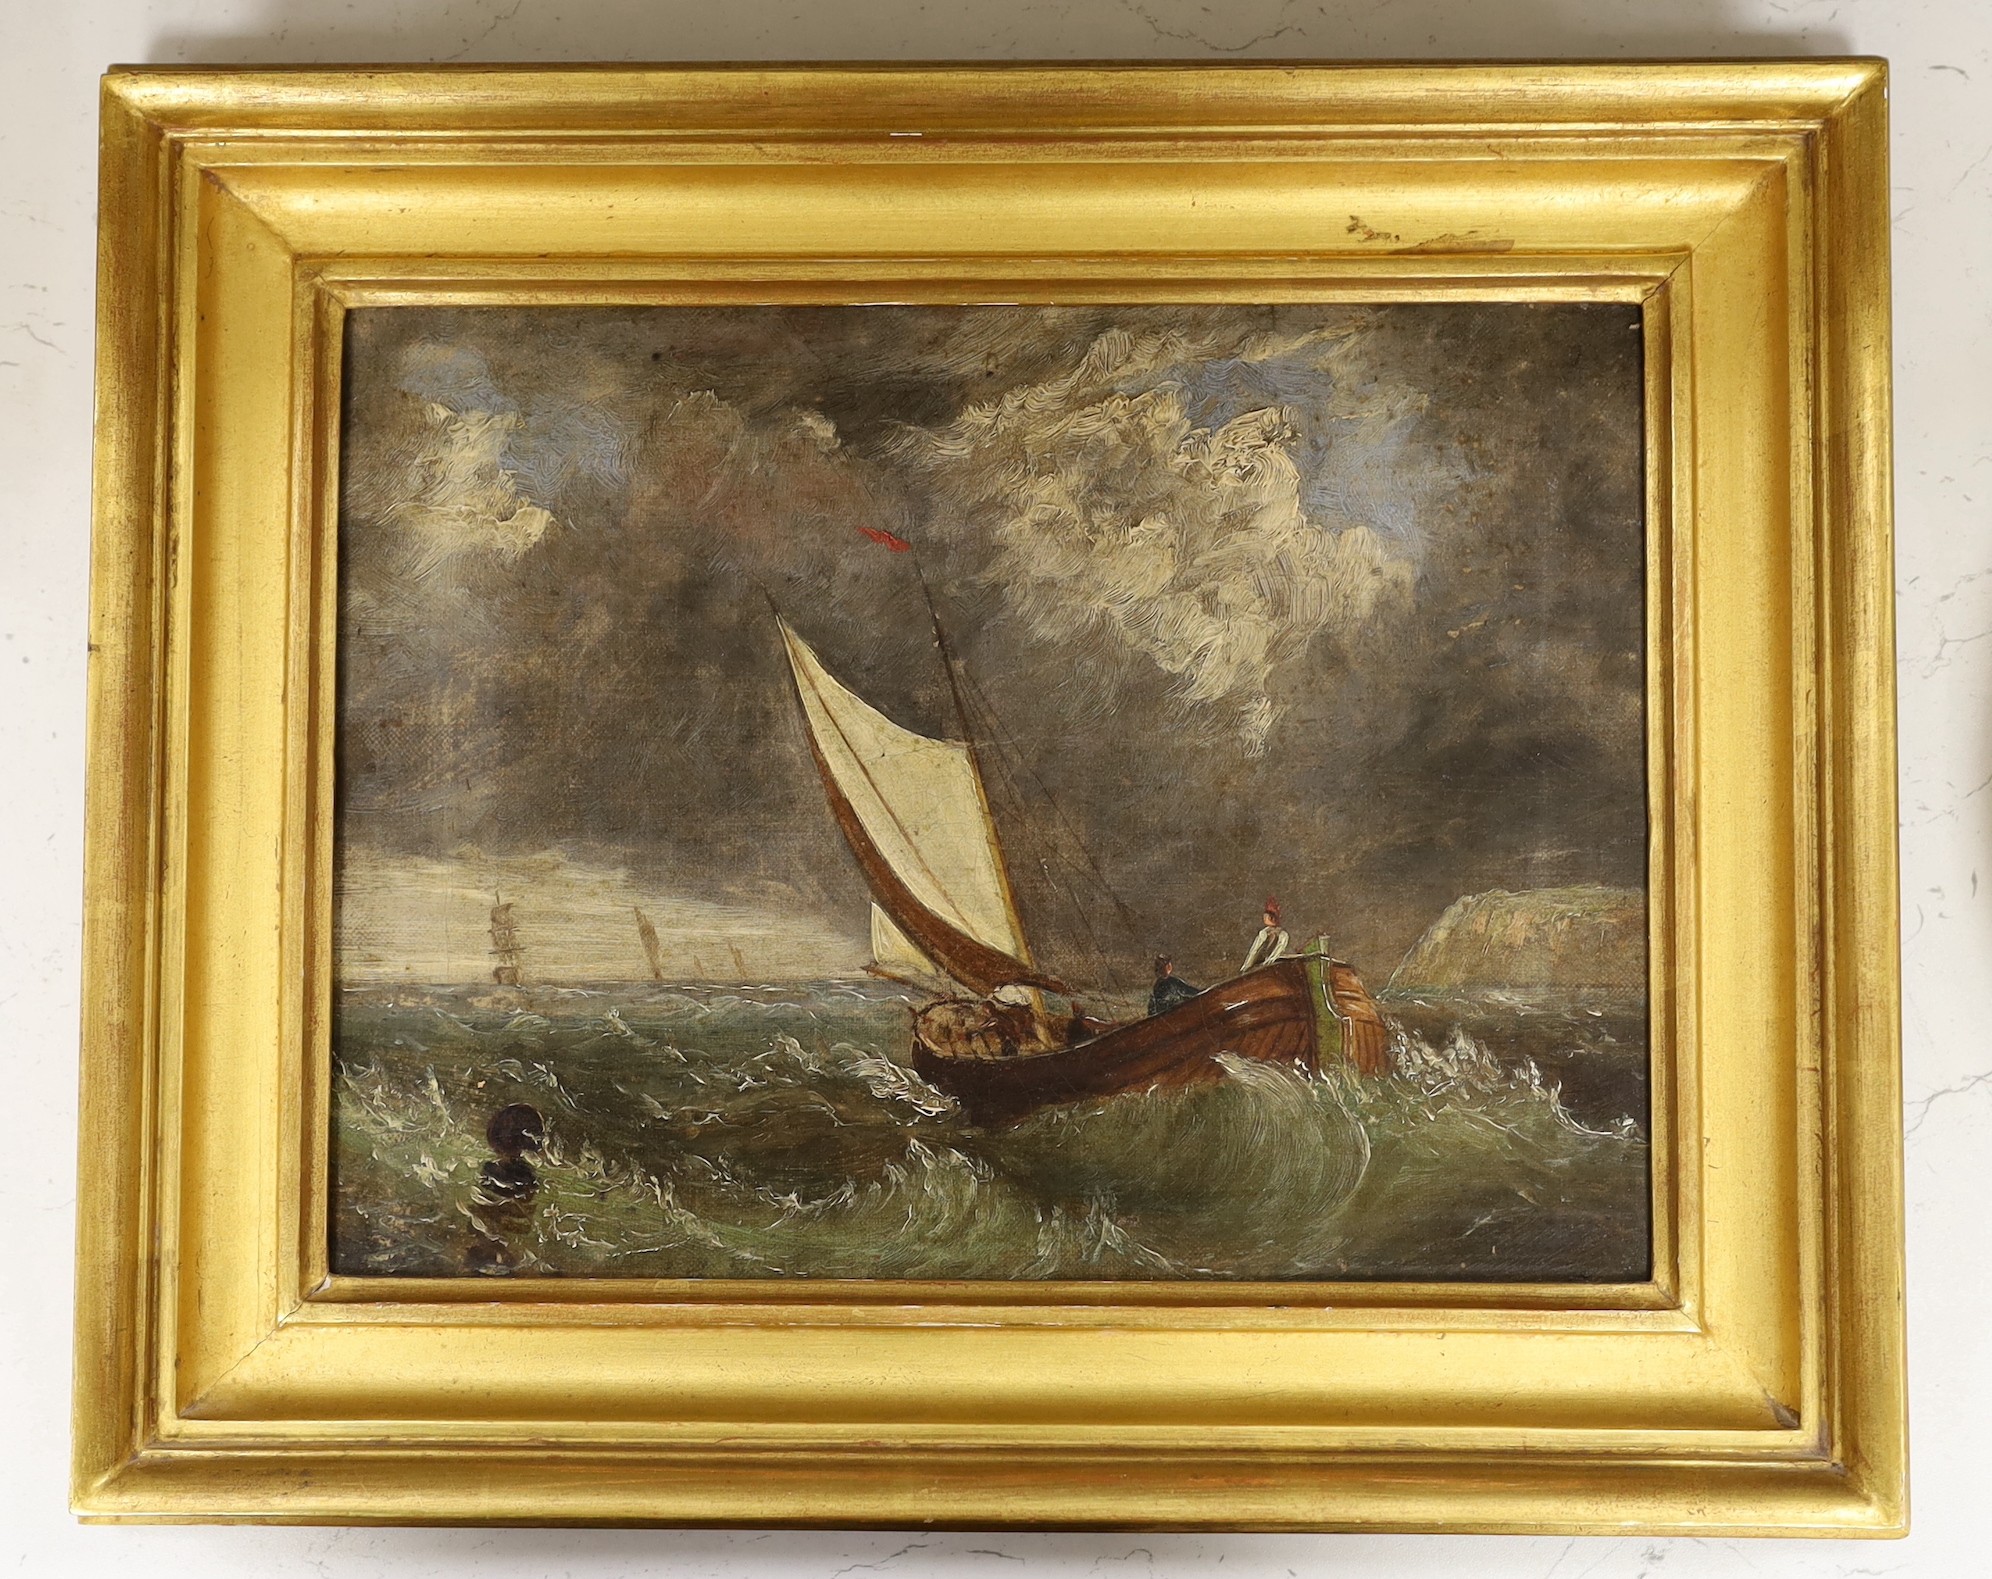 19th century English School, oil on canvas, Fishing boat leaving harbour, 22 x 29cm - Image 2 of 2